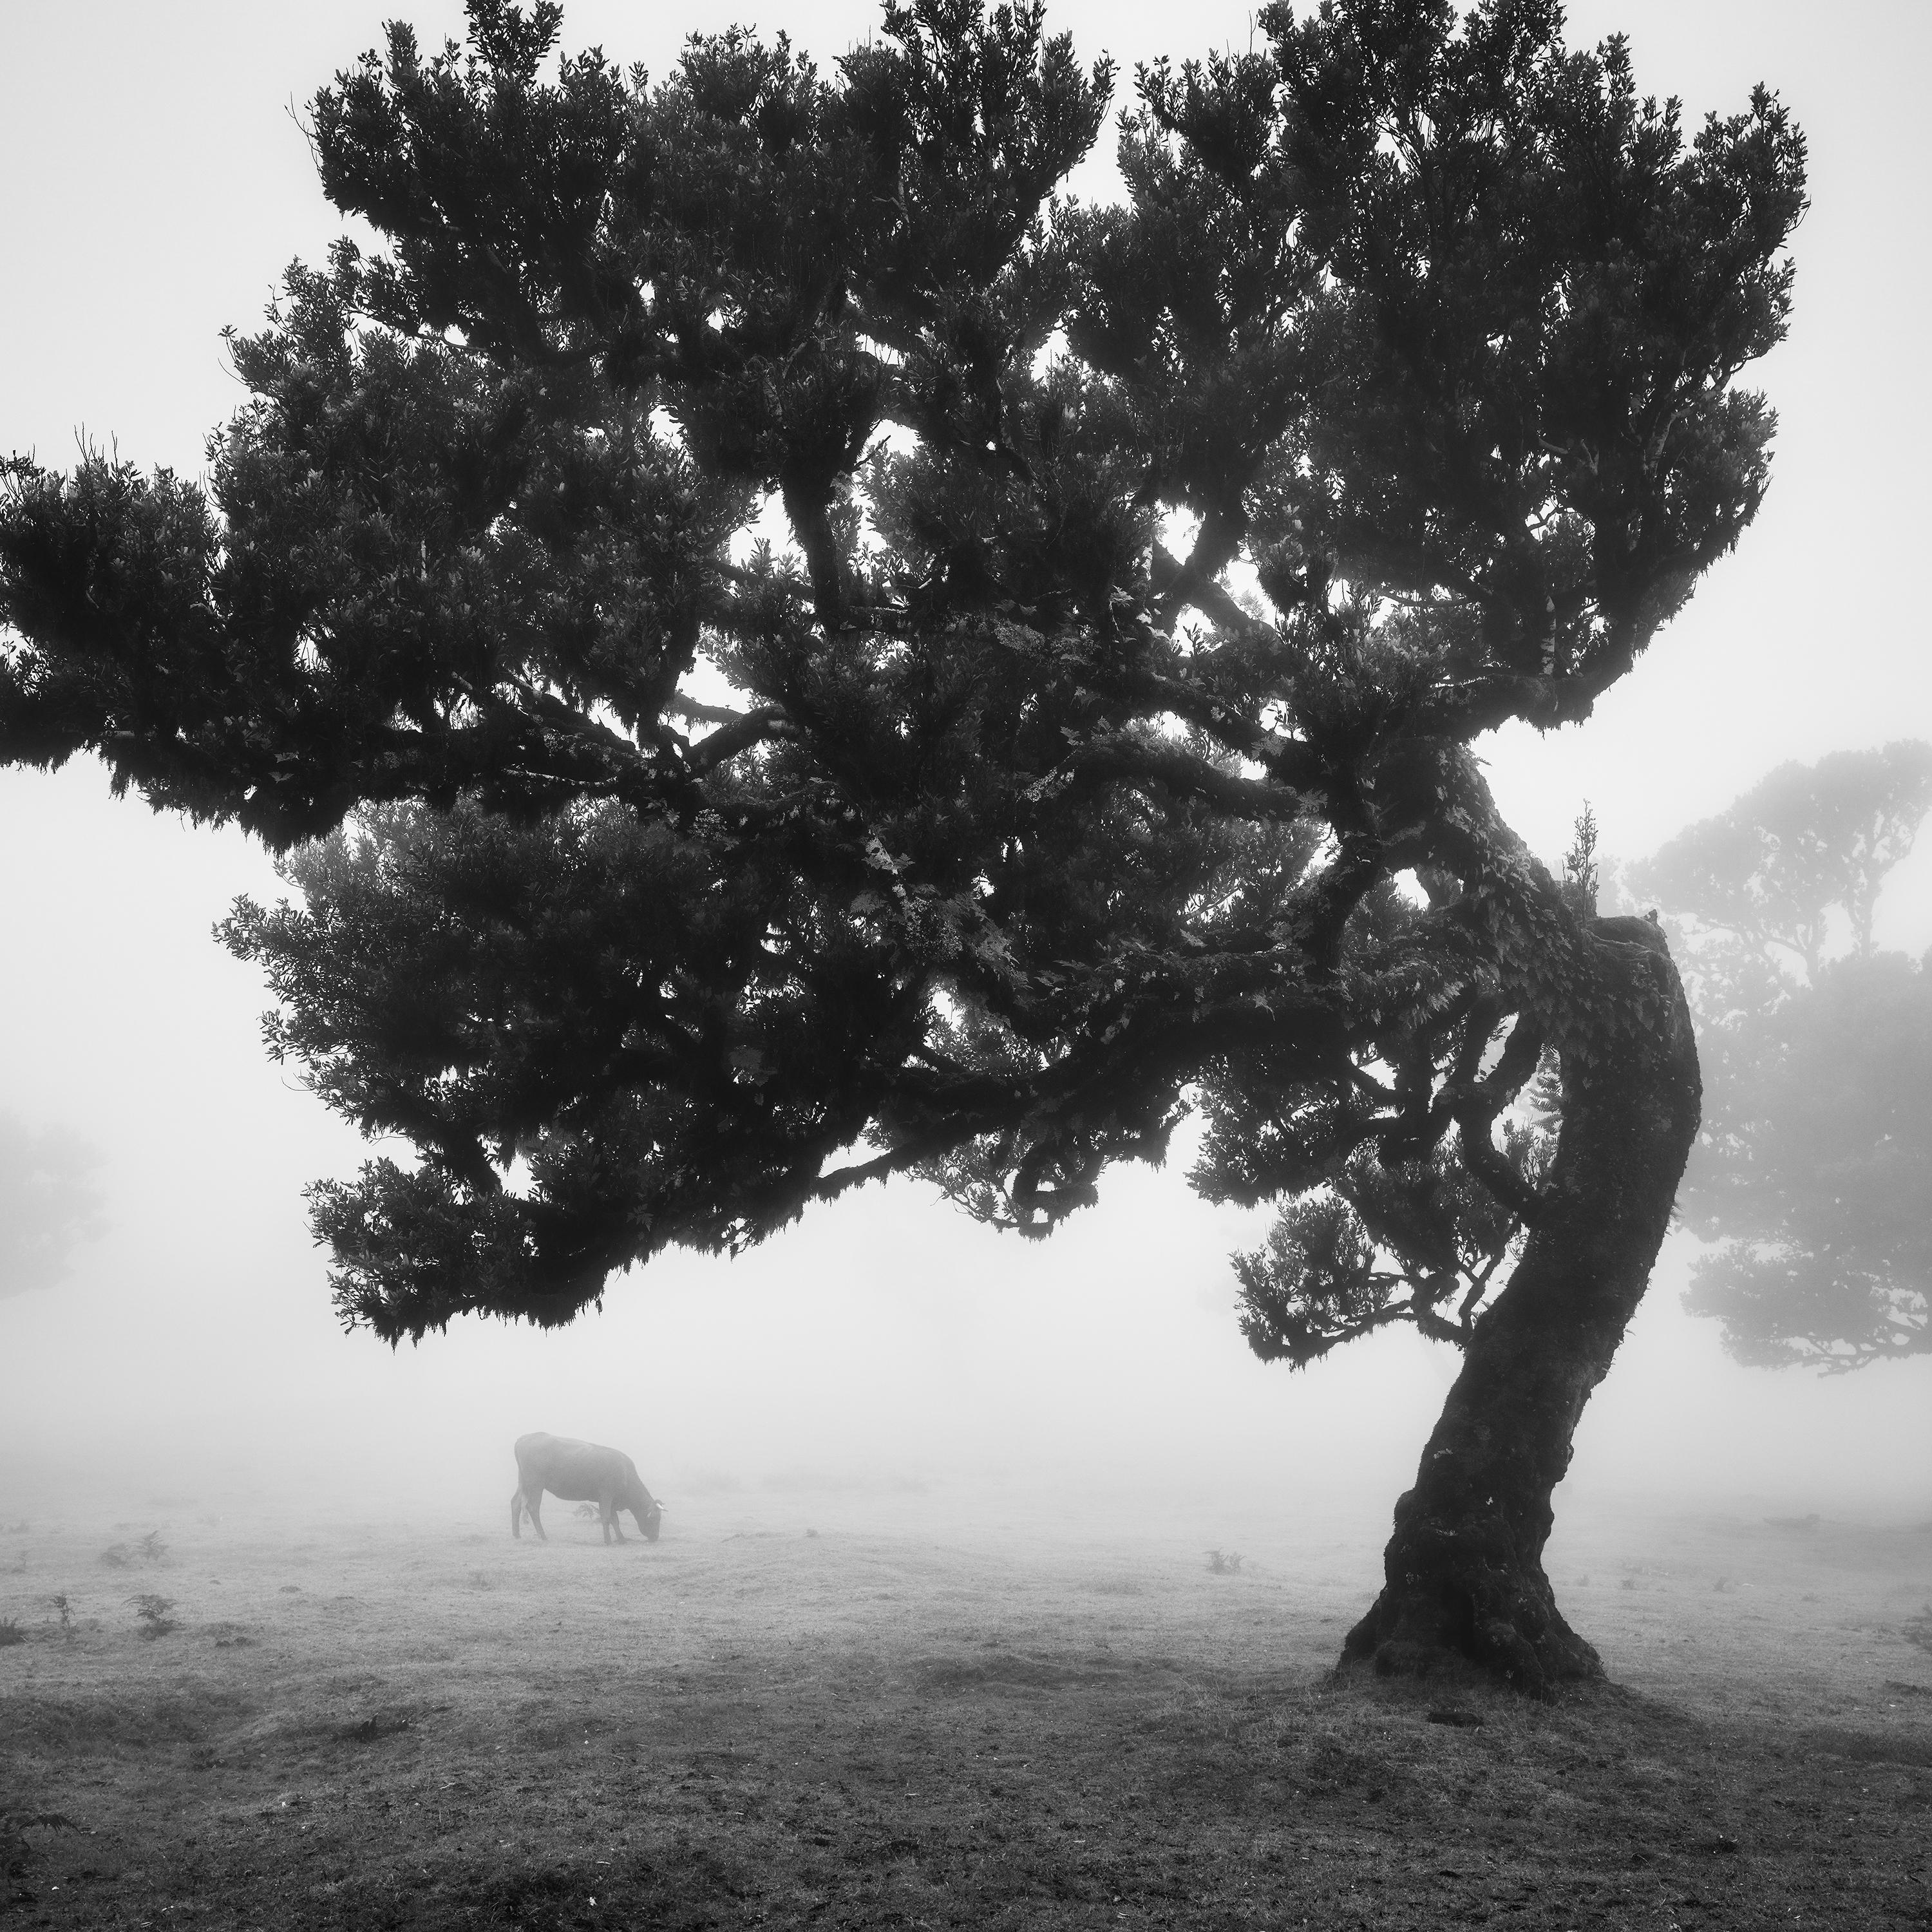 Cows on the foggy Pasture, Portugal, black and white photography, art landscape For Sale 4